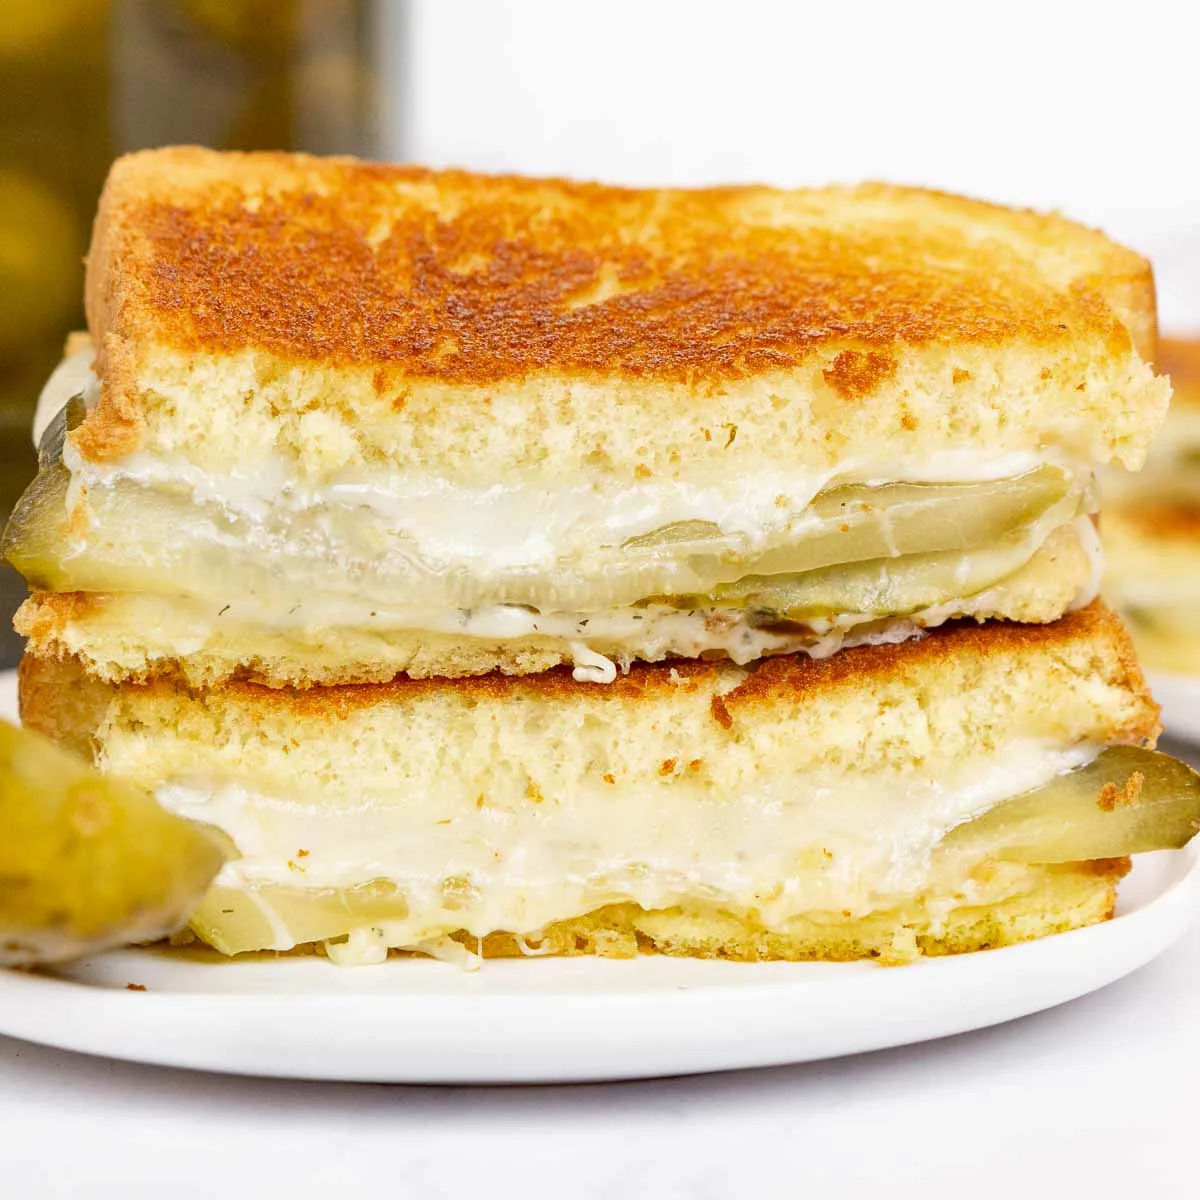 Pickle grilled cheese sandwich on a plate